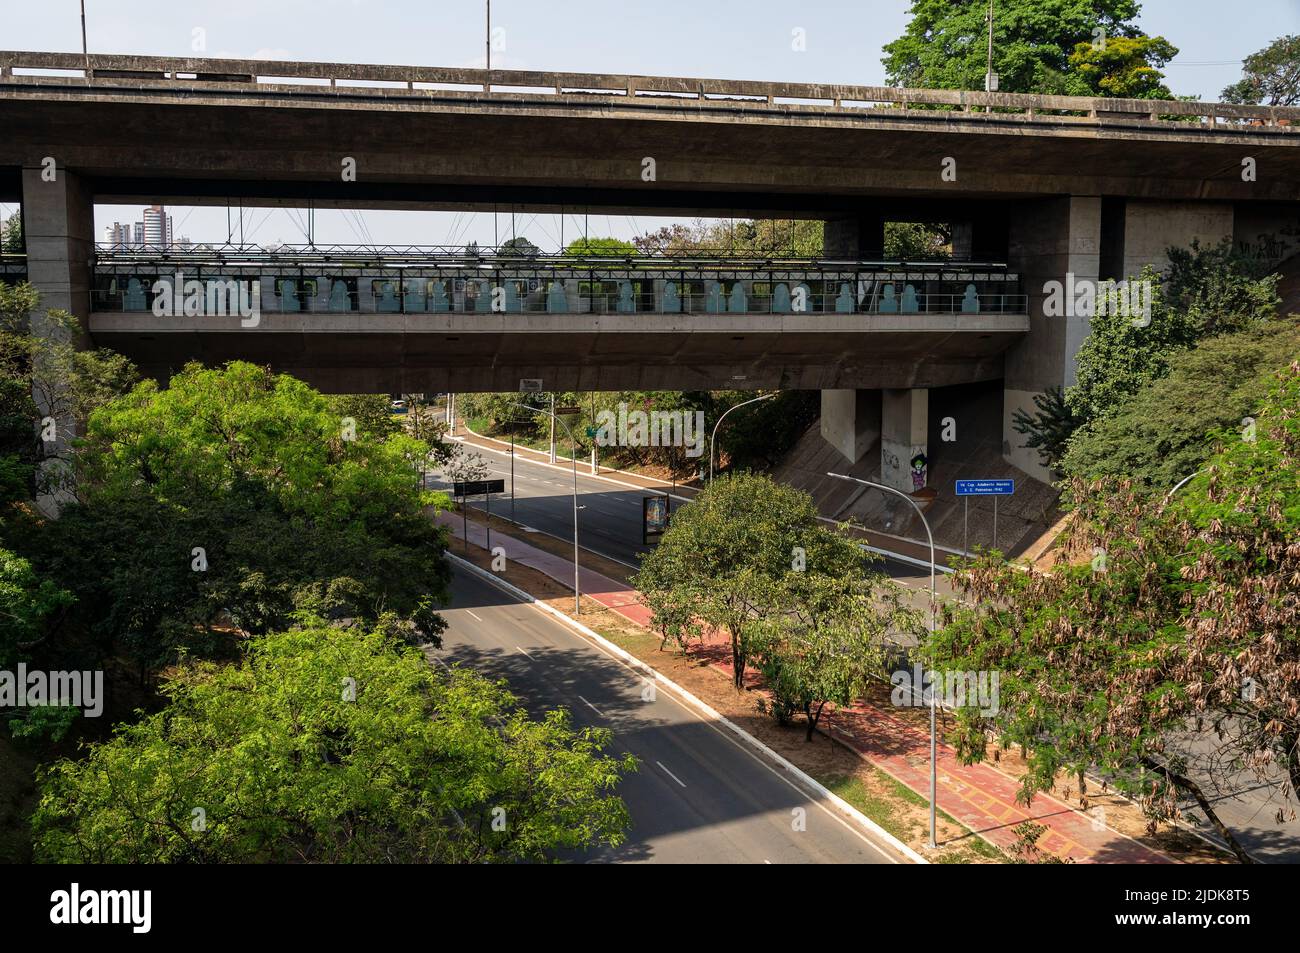 Opposite view of Sumare metro station (Line 2 - green) right below under Capitao Adalberto Mendes viaduct under sunny clear blue sky in a normal day. Stock Photo